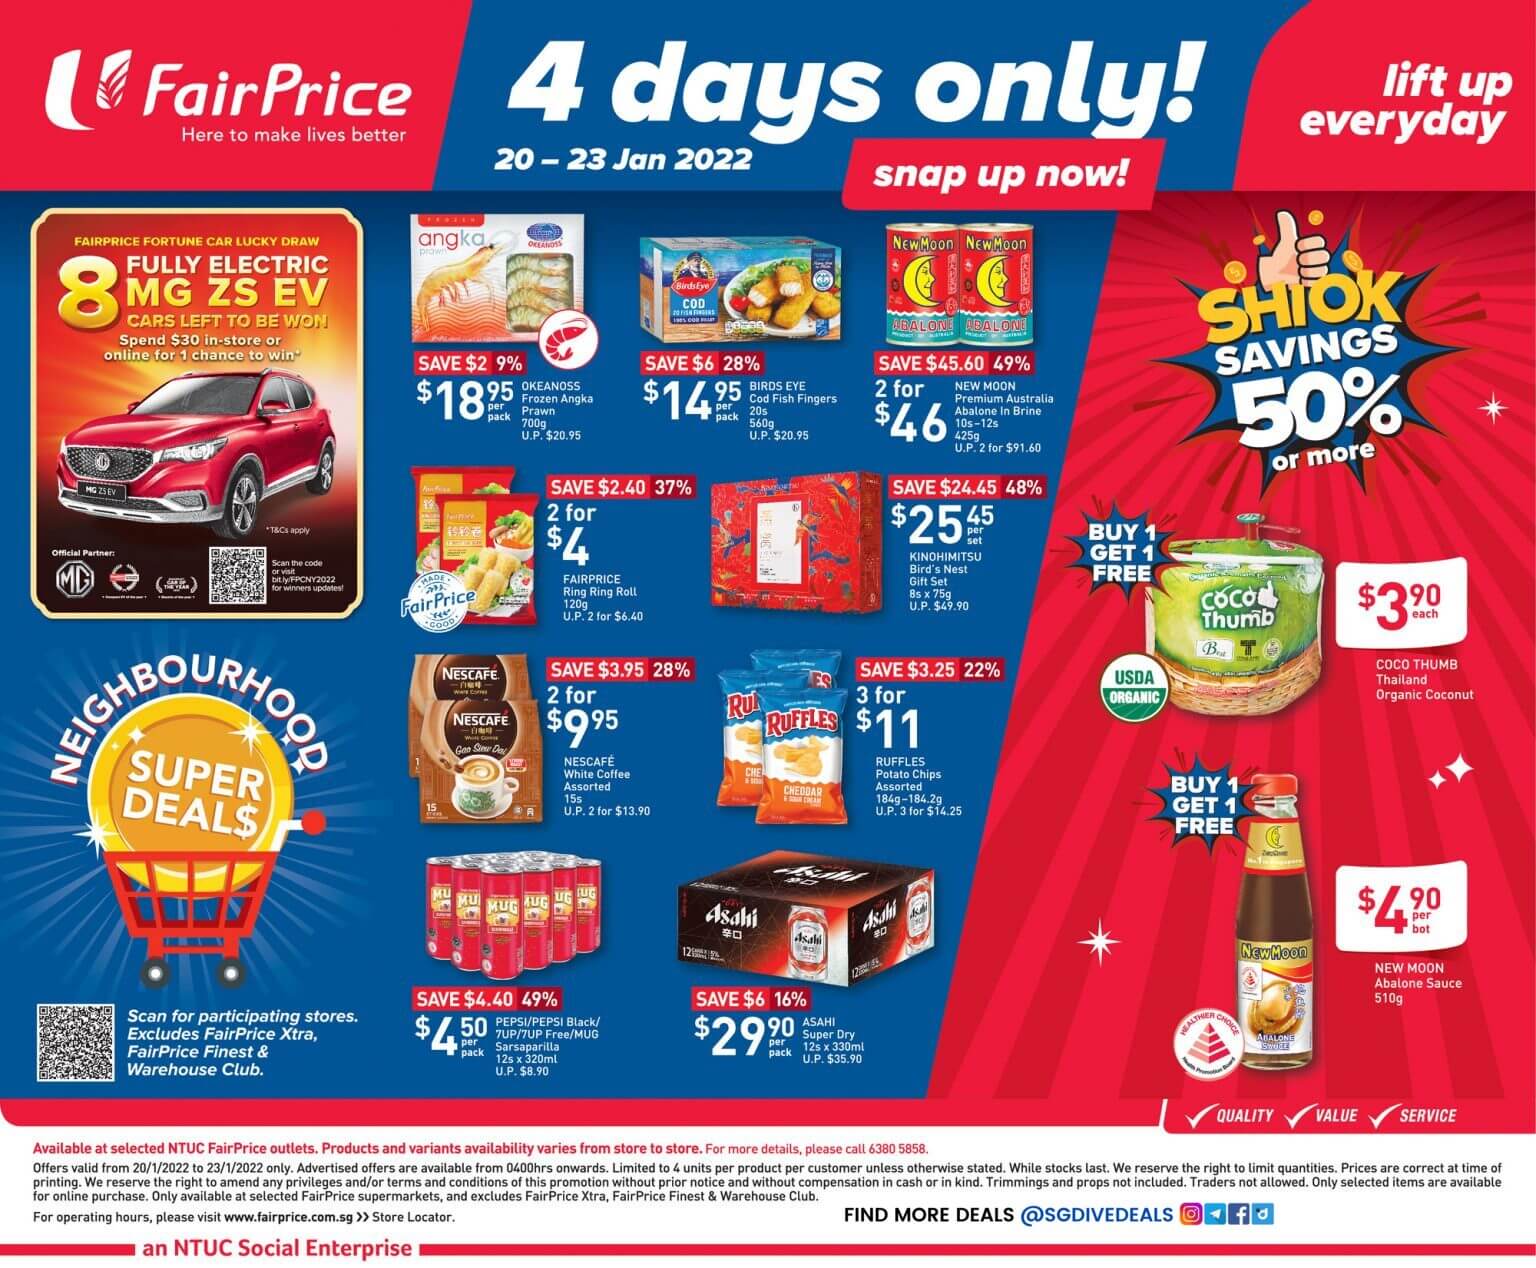 NTUC FairPrice,4 days only shiok savings 50% or more